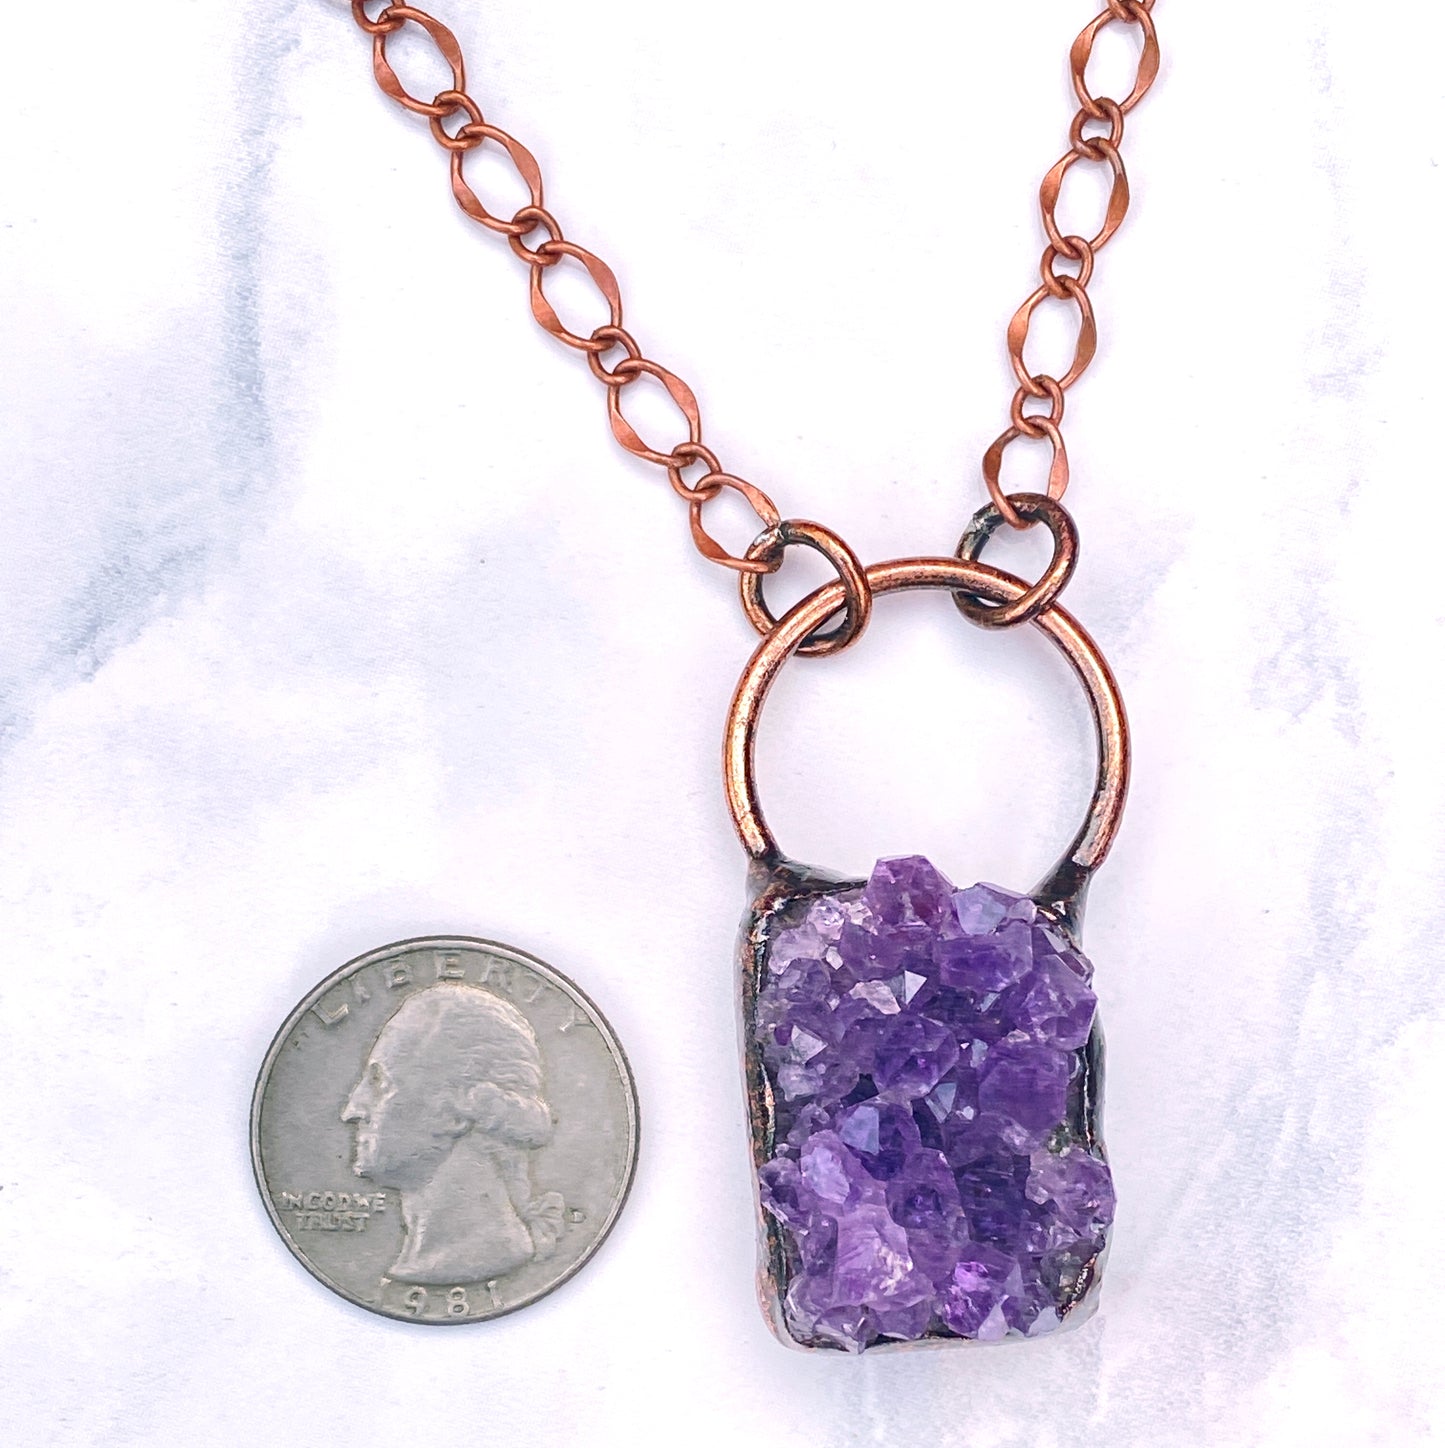 Amethyst and copper long necklace